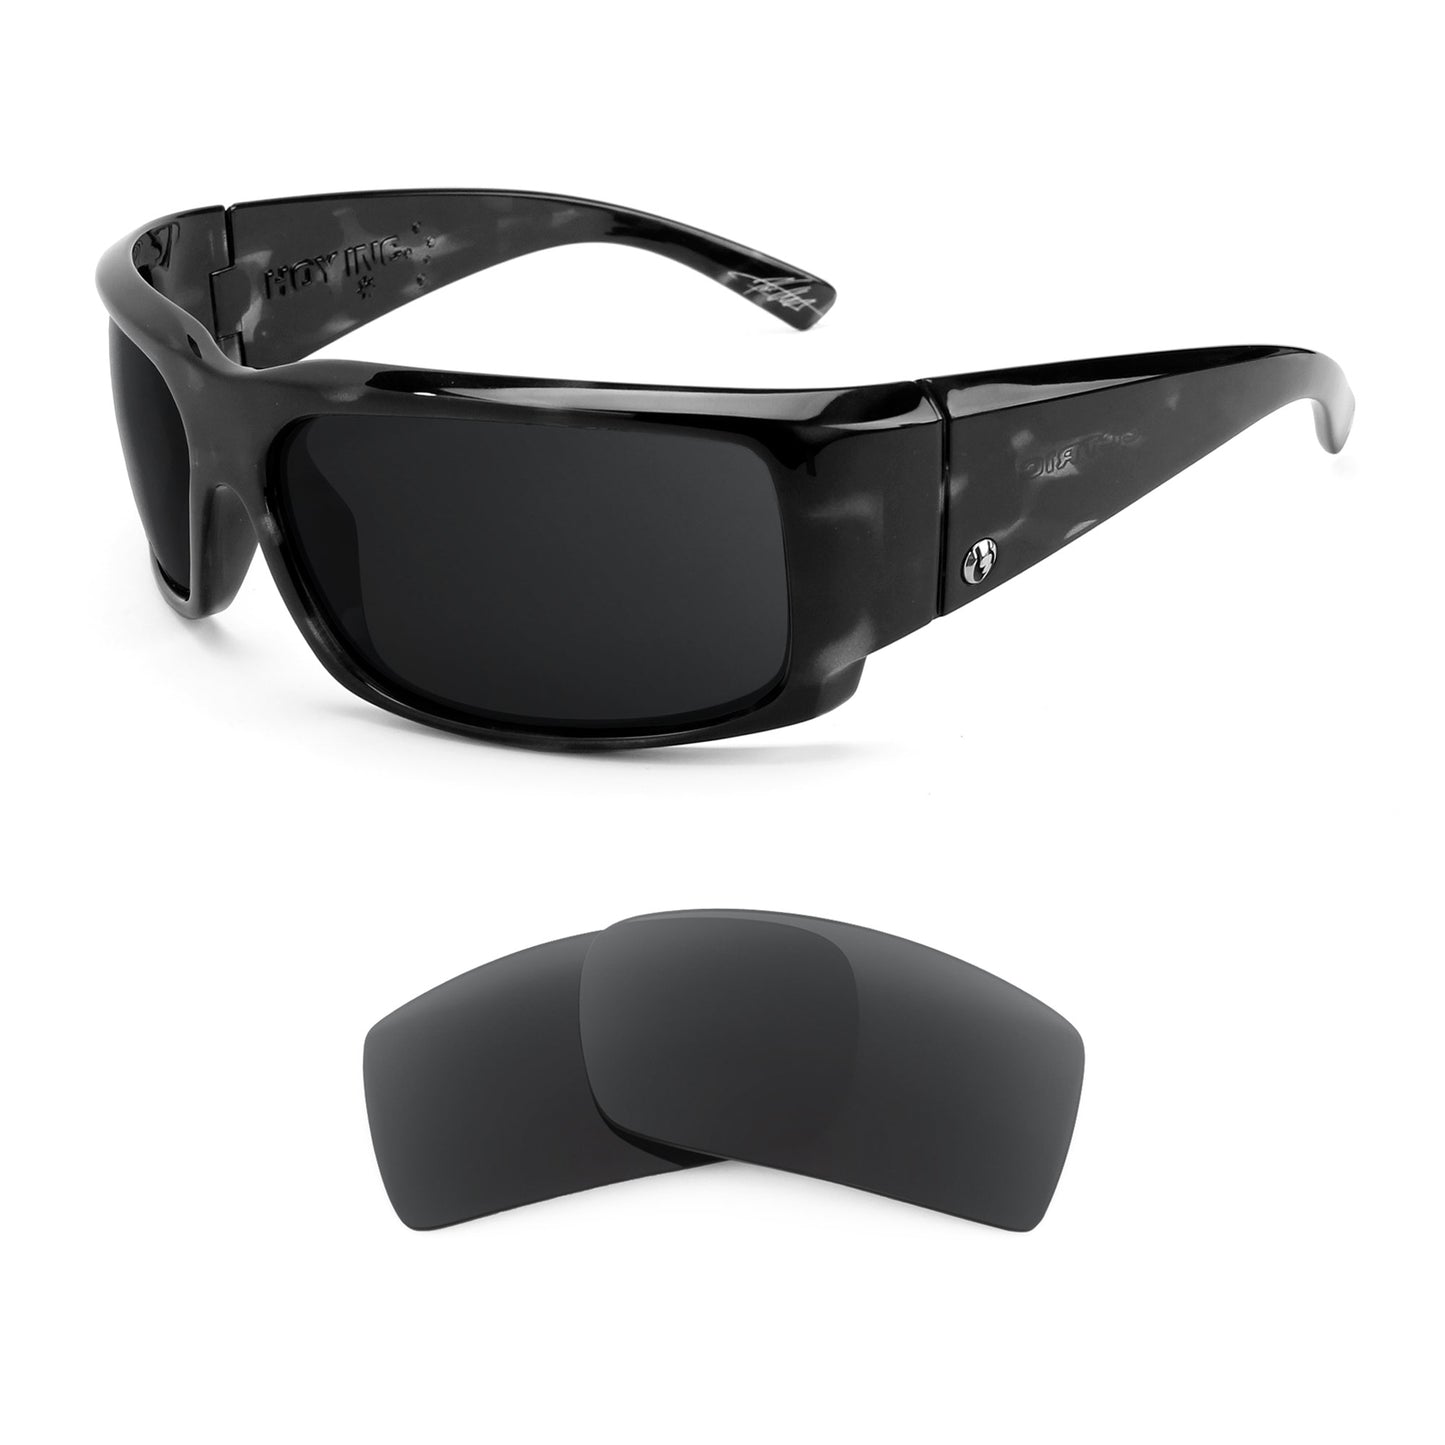 Electric Hoy Inc sunglasses with replacement lenses